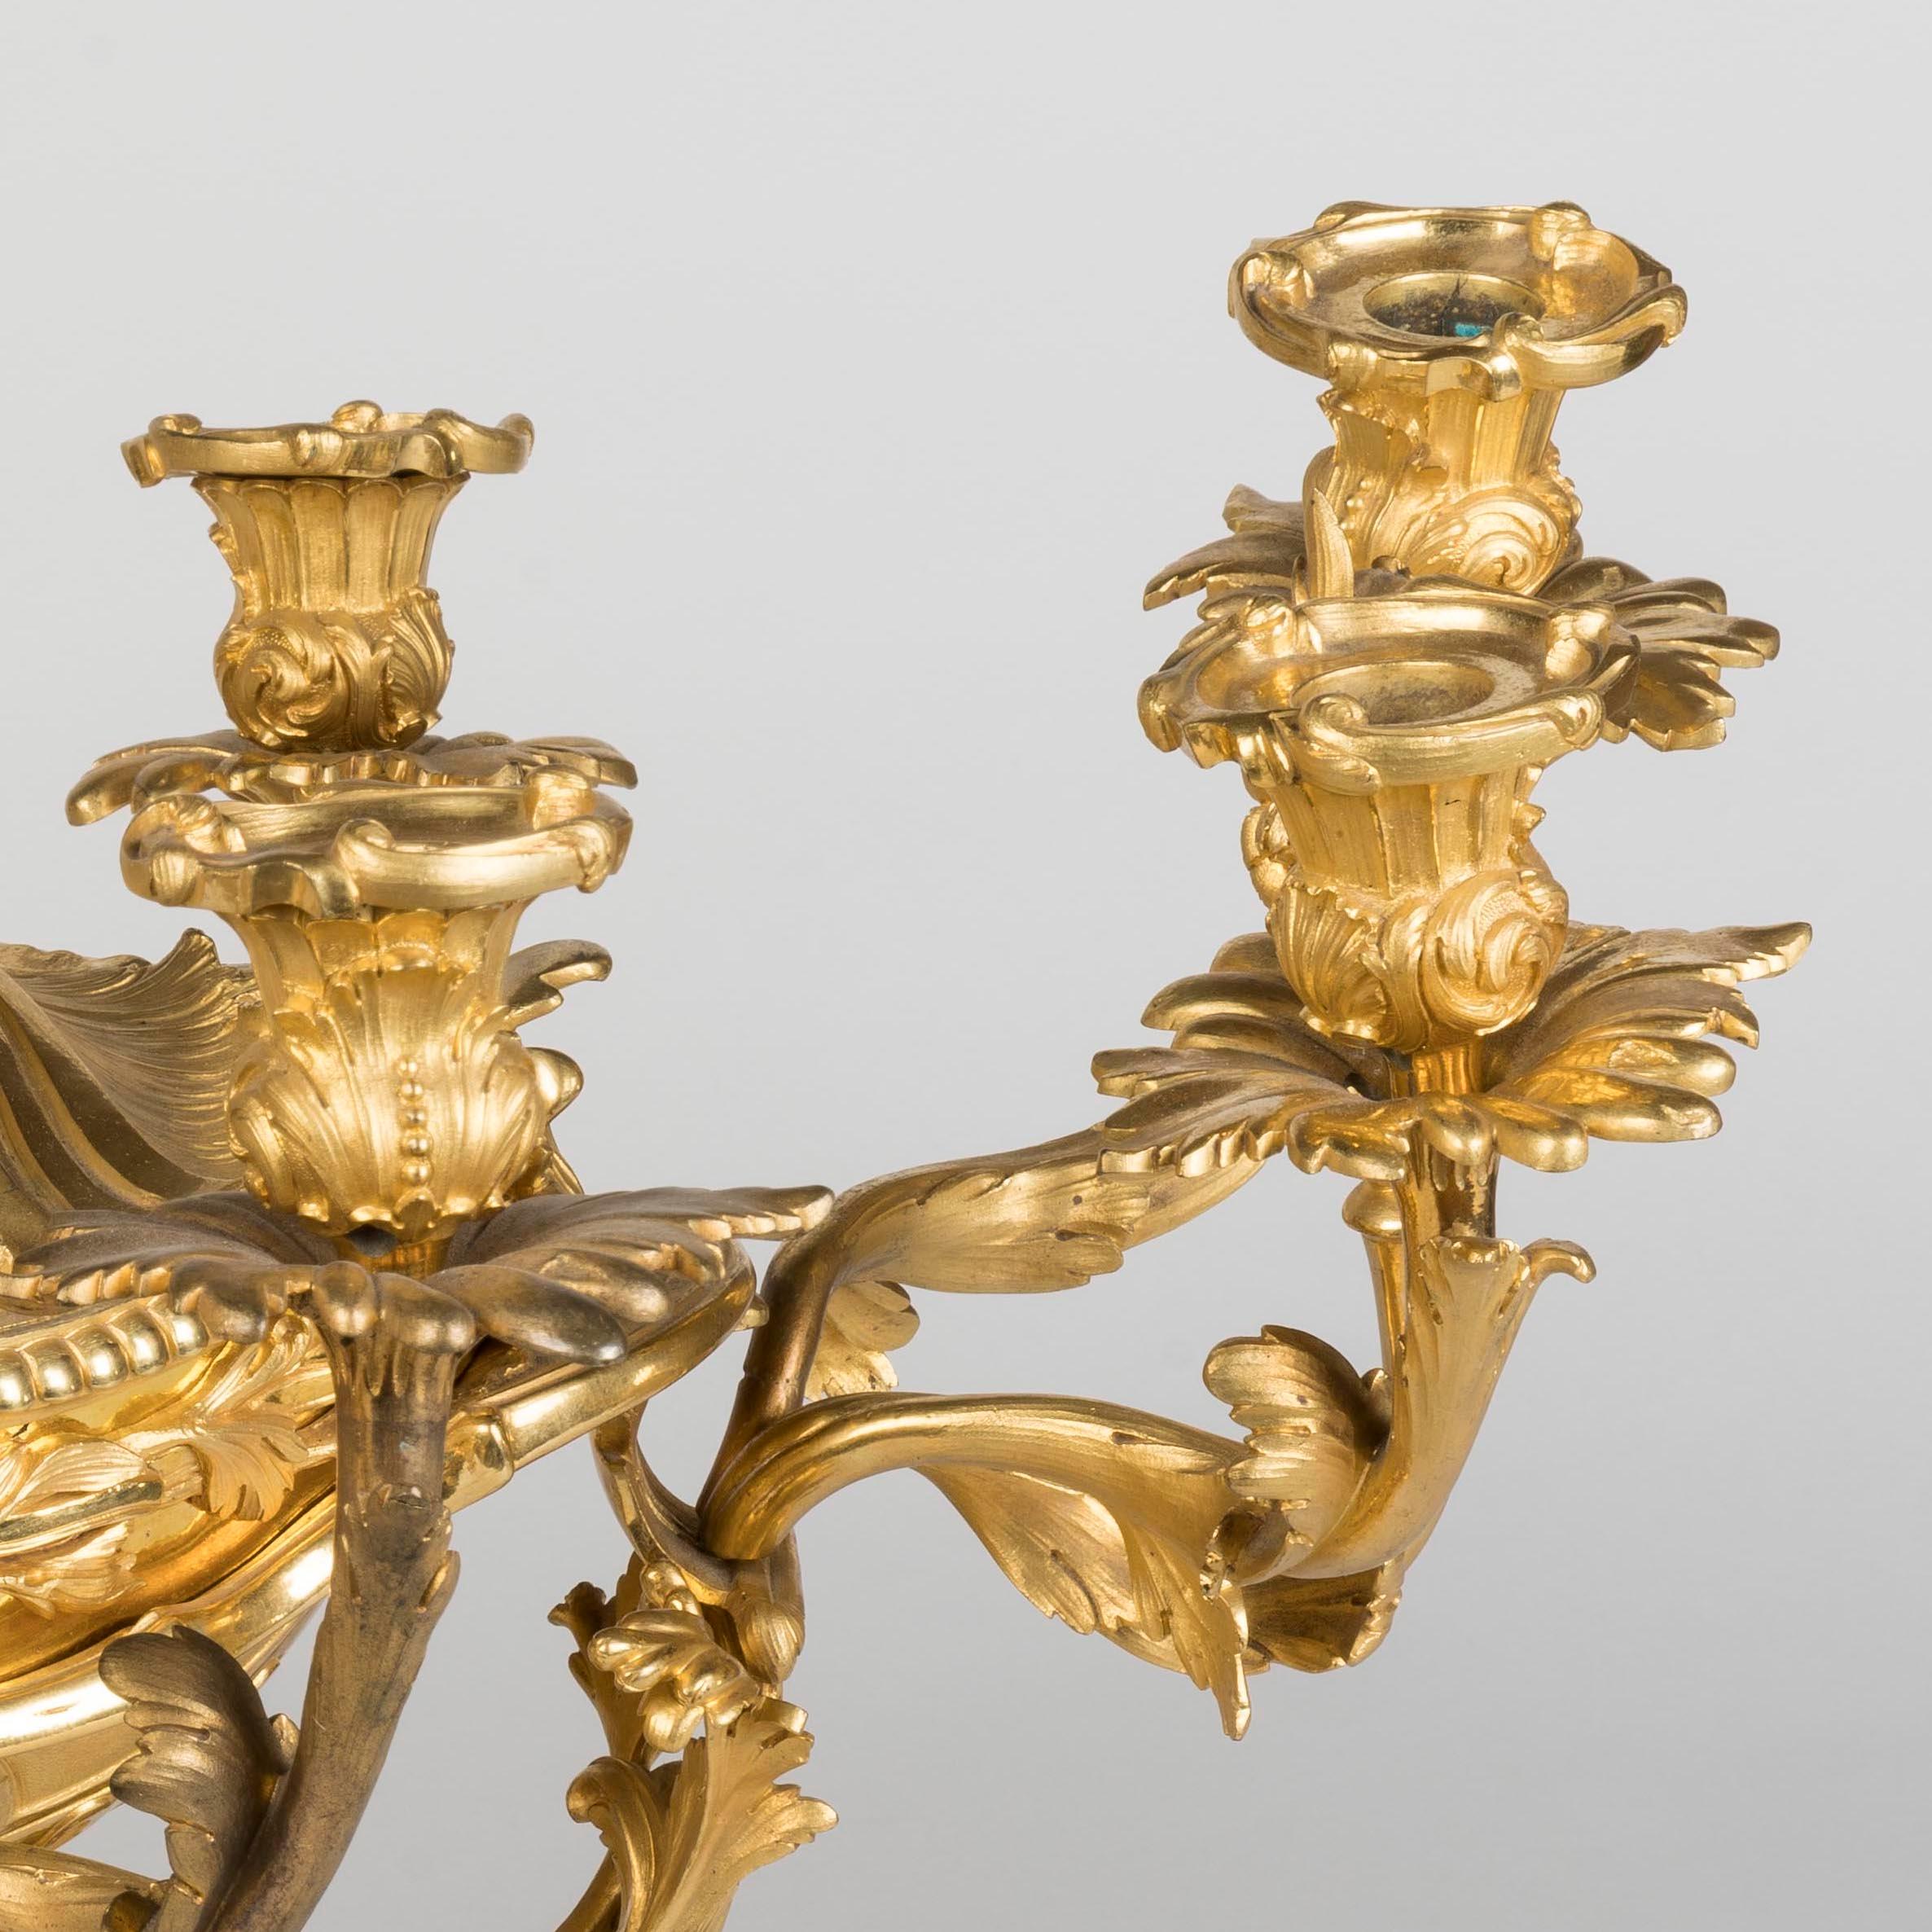 19th Century French Gilded Bronze Rococo Centrepiece For Sale 2